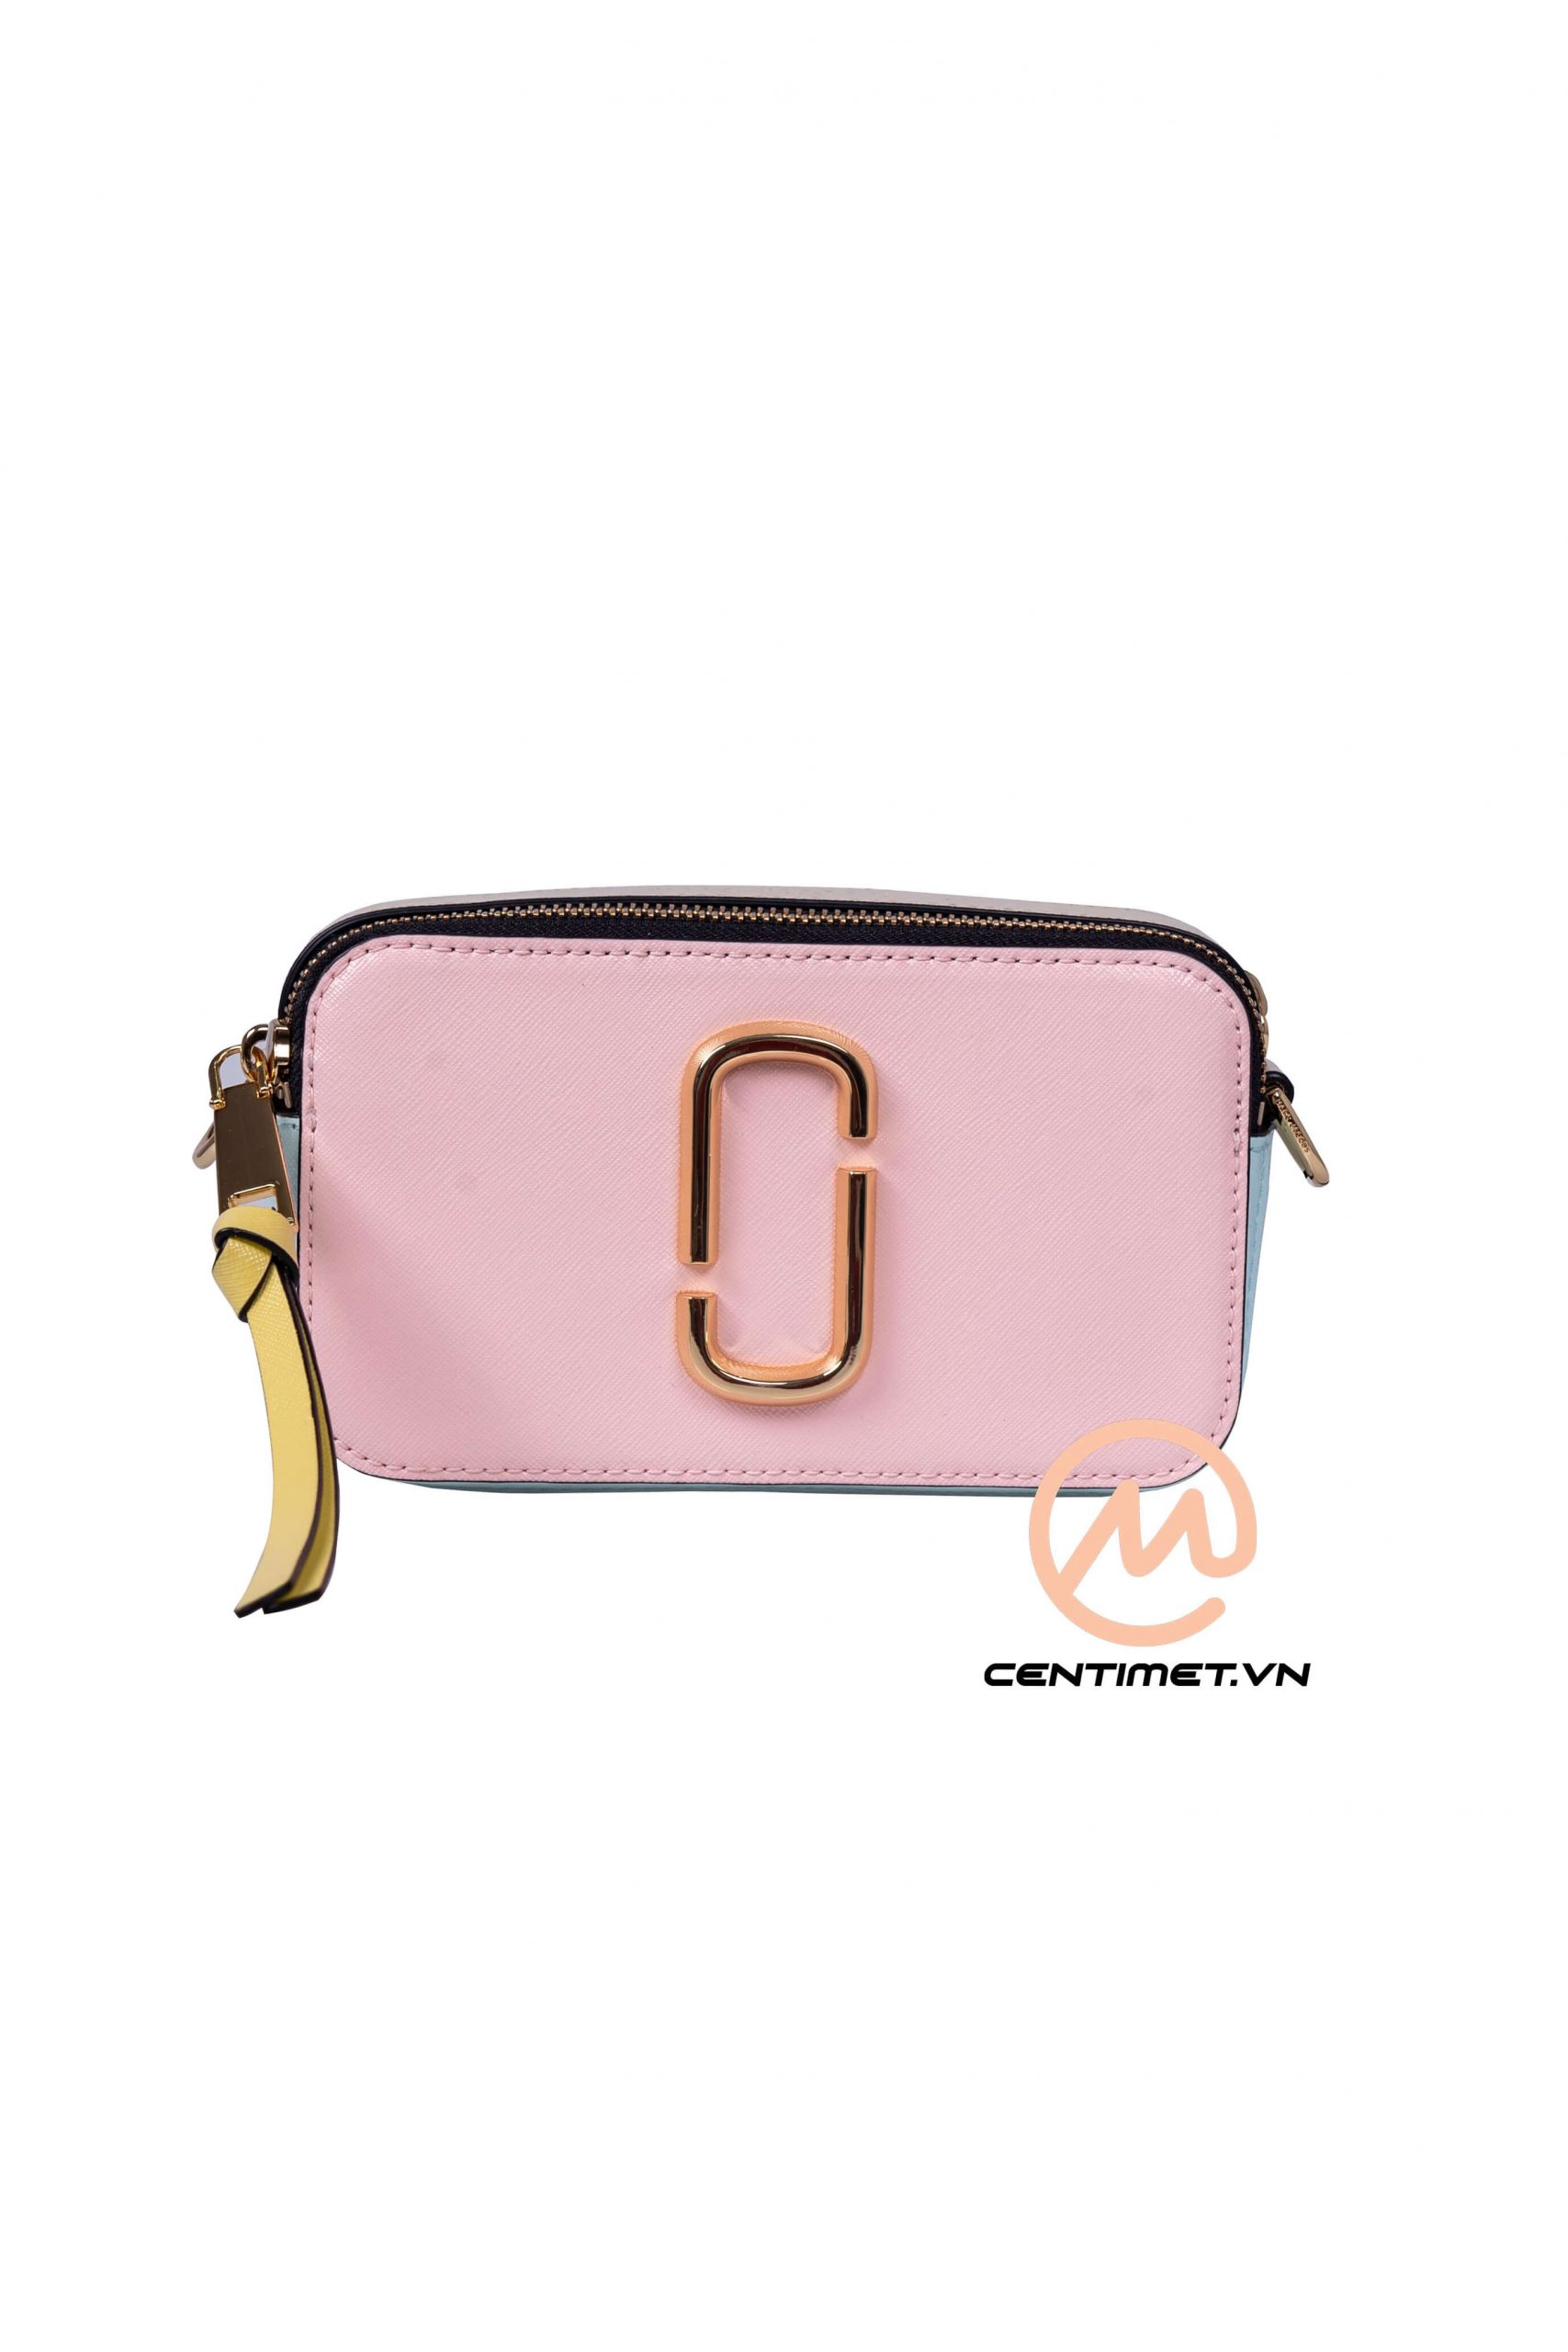 Tui Marc Jacobs Snapshot Small Camera Bag in Pink-DSC09939-Edit1